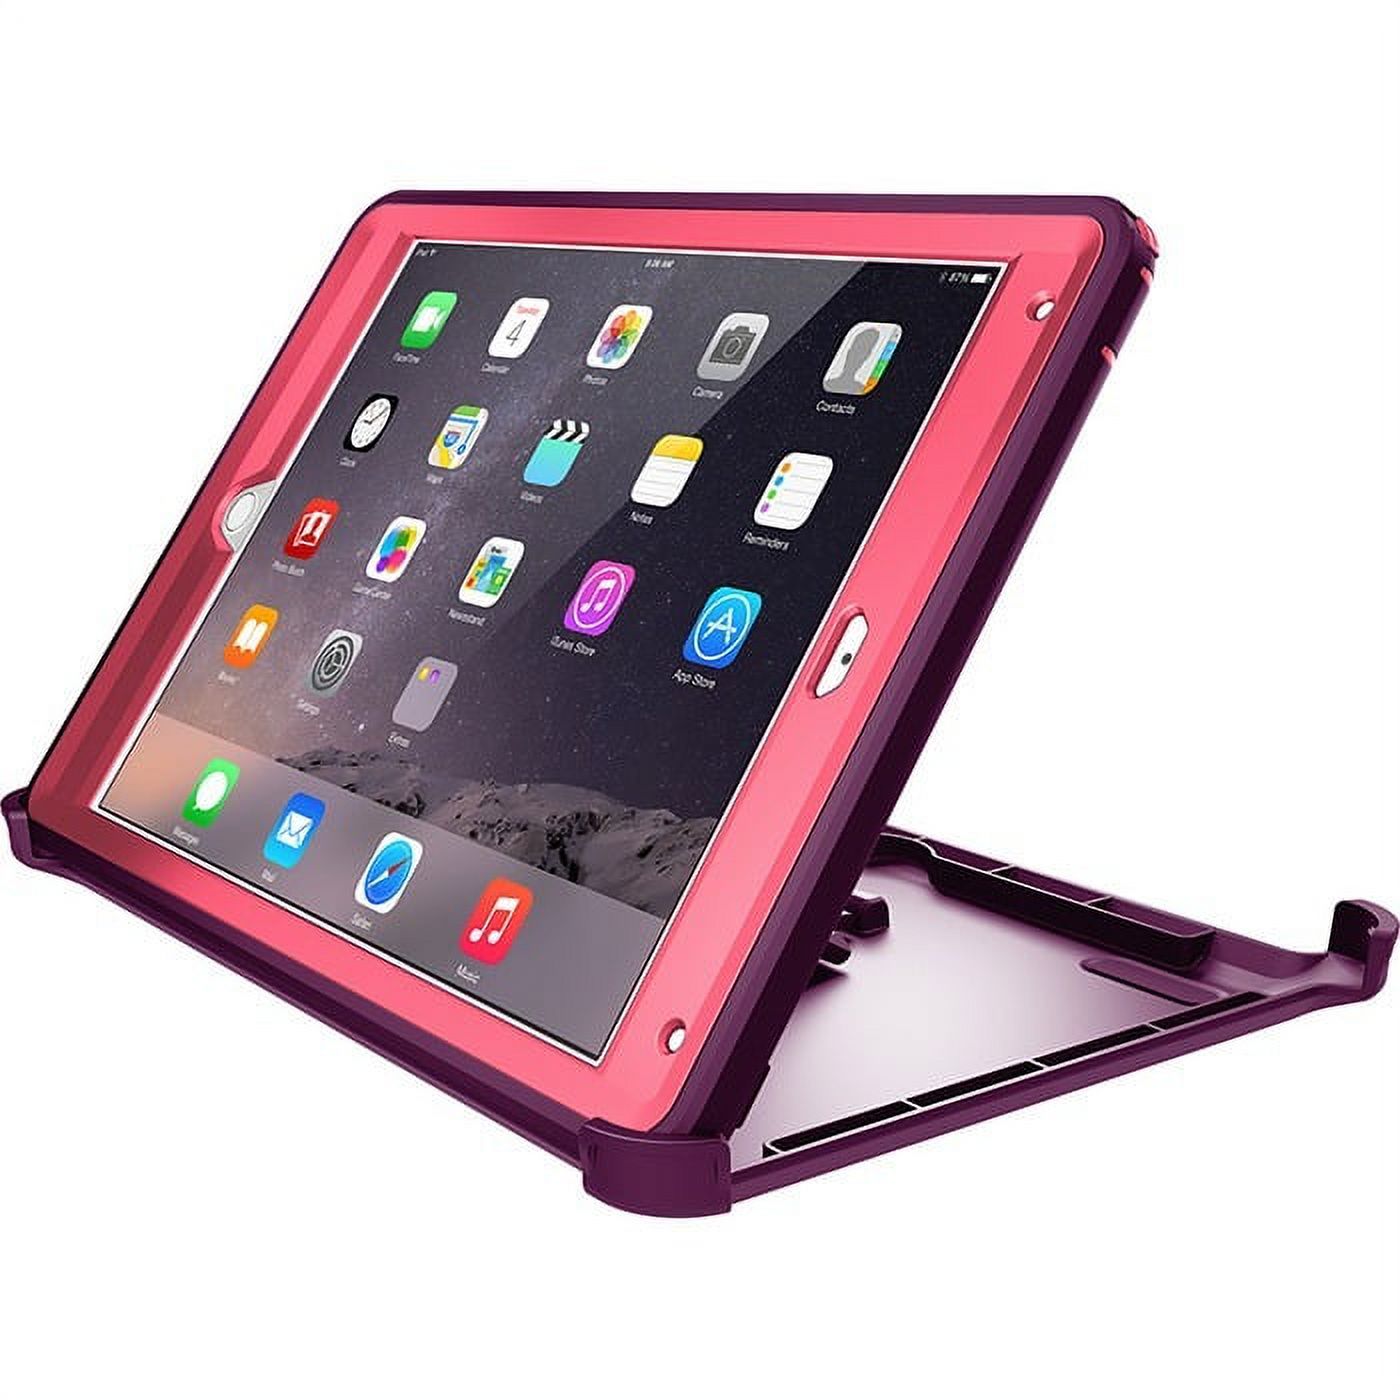 OtterBox Defender Series Case for iPad Air 2 - image 2 of 6